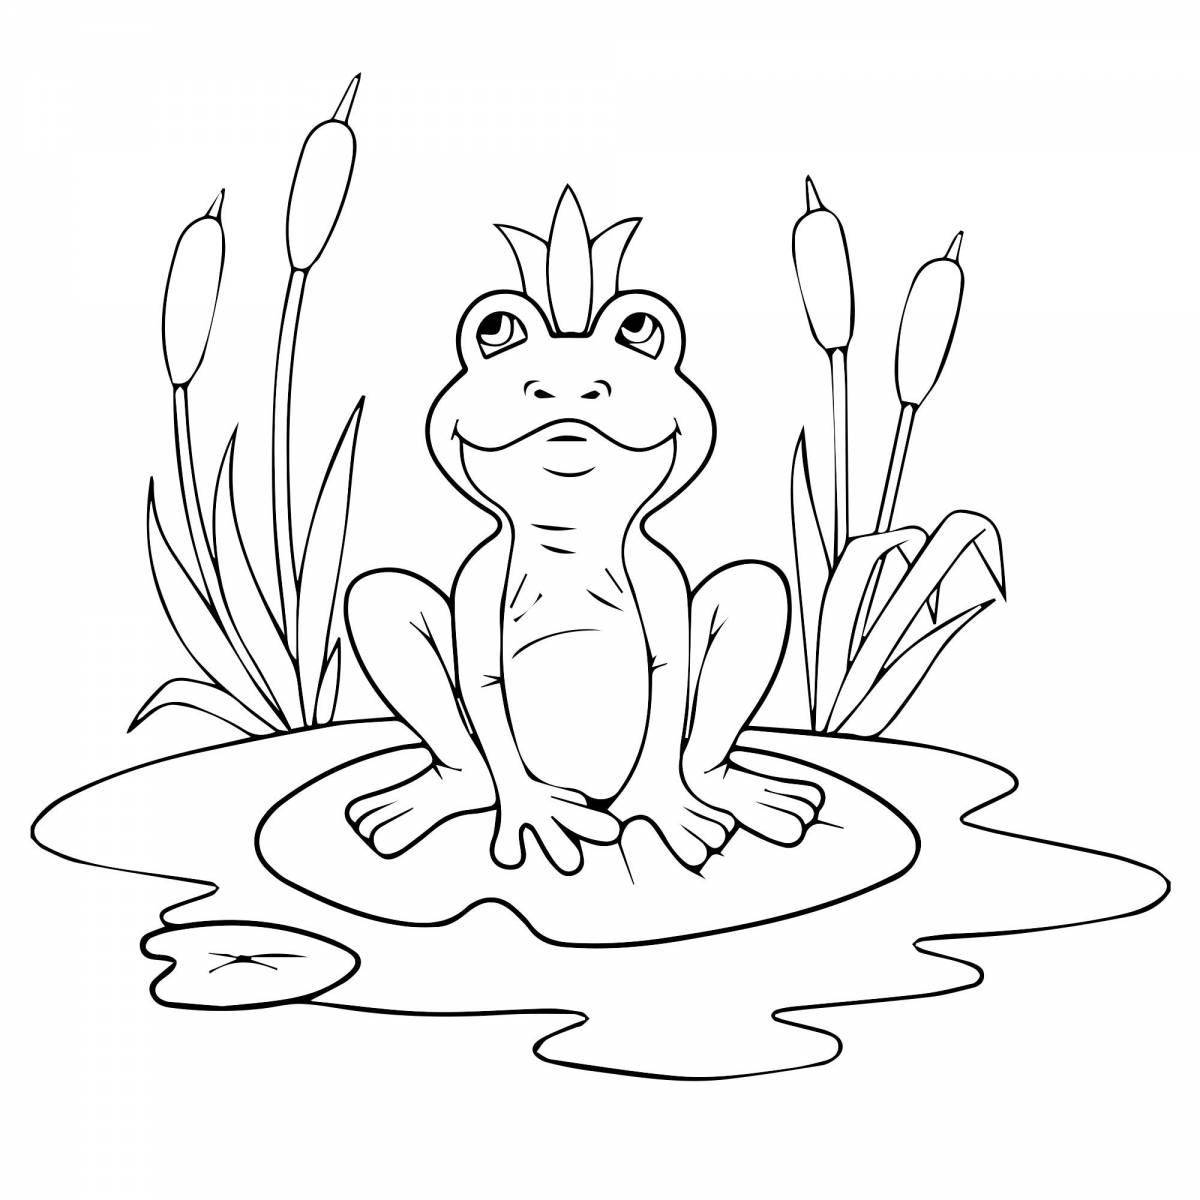 Coloring page cute frog traveler